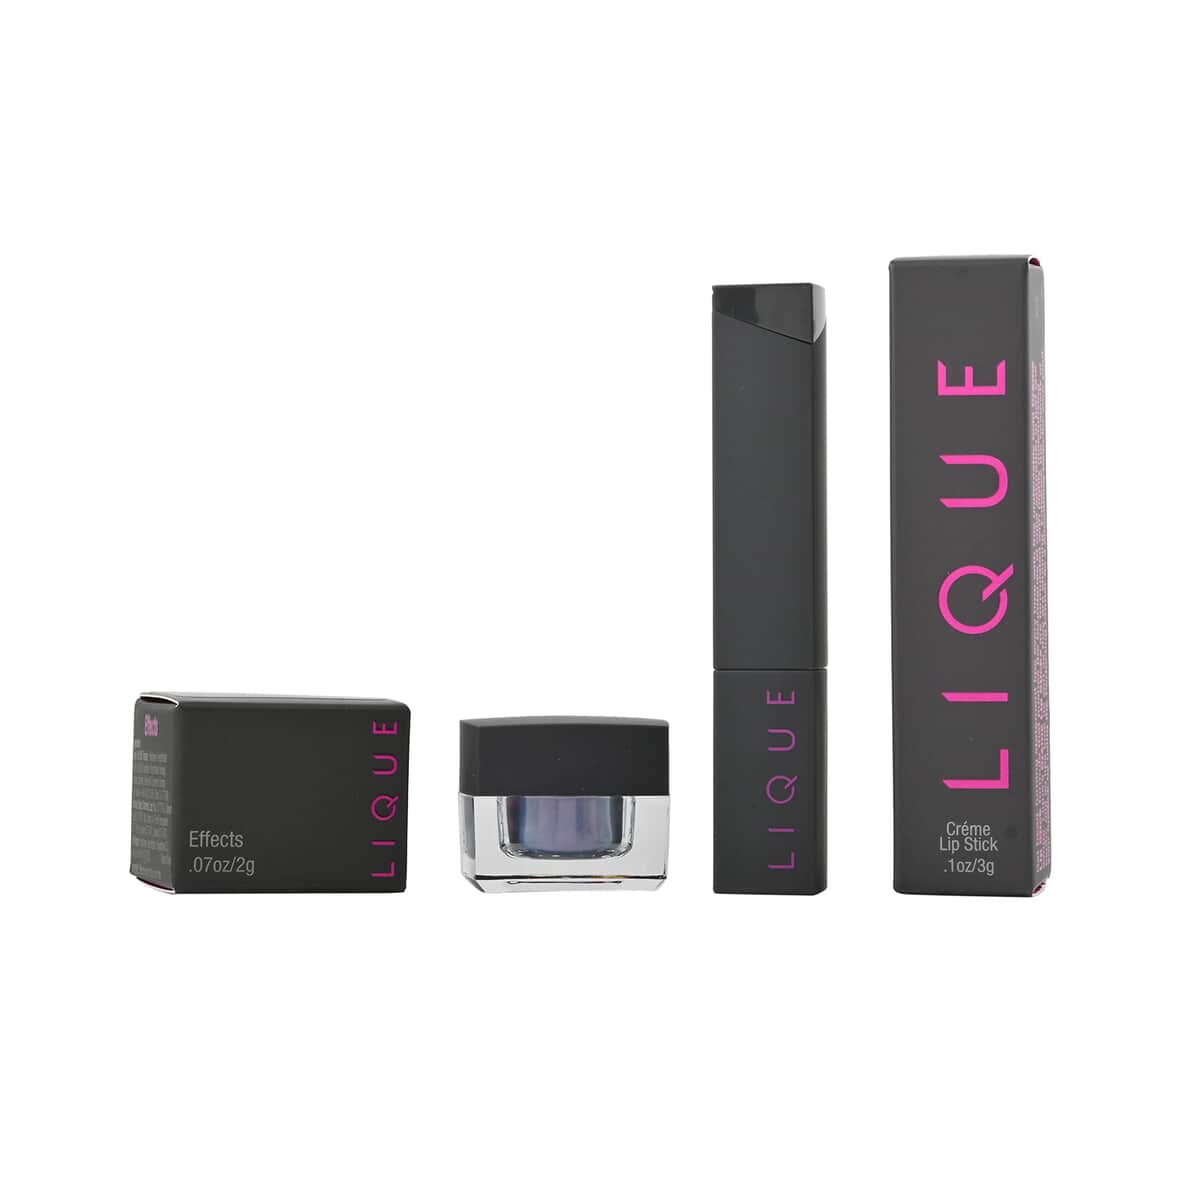 Closeout Lique Set of 2 (One Lipstick & One Effect Powder) with Free Set of 2 (One Lipstick & One Effect Powder) image number 0